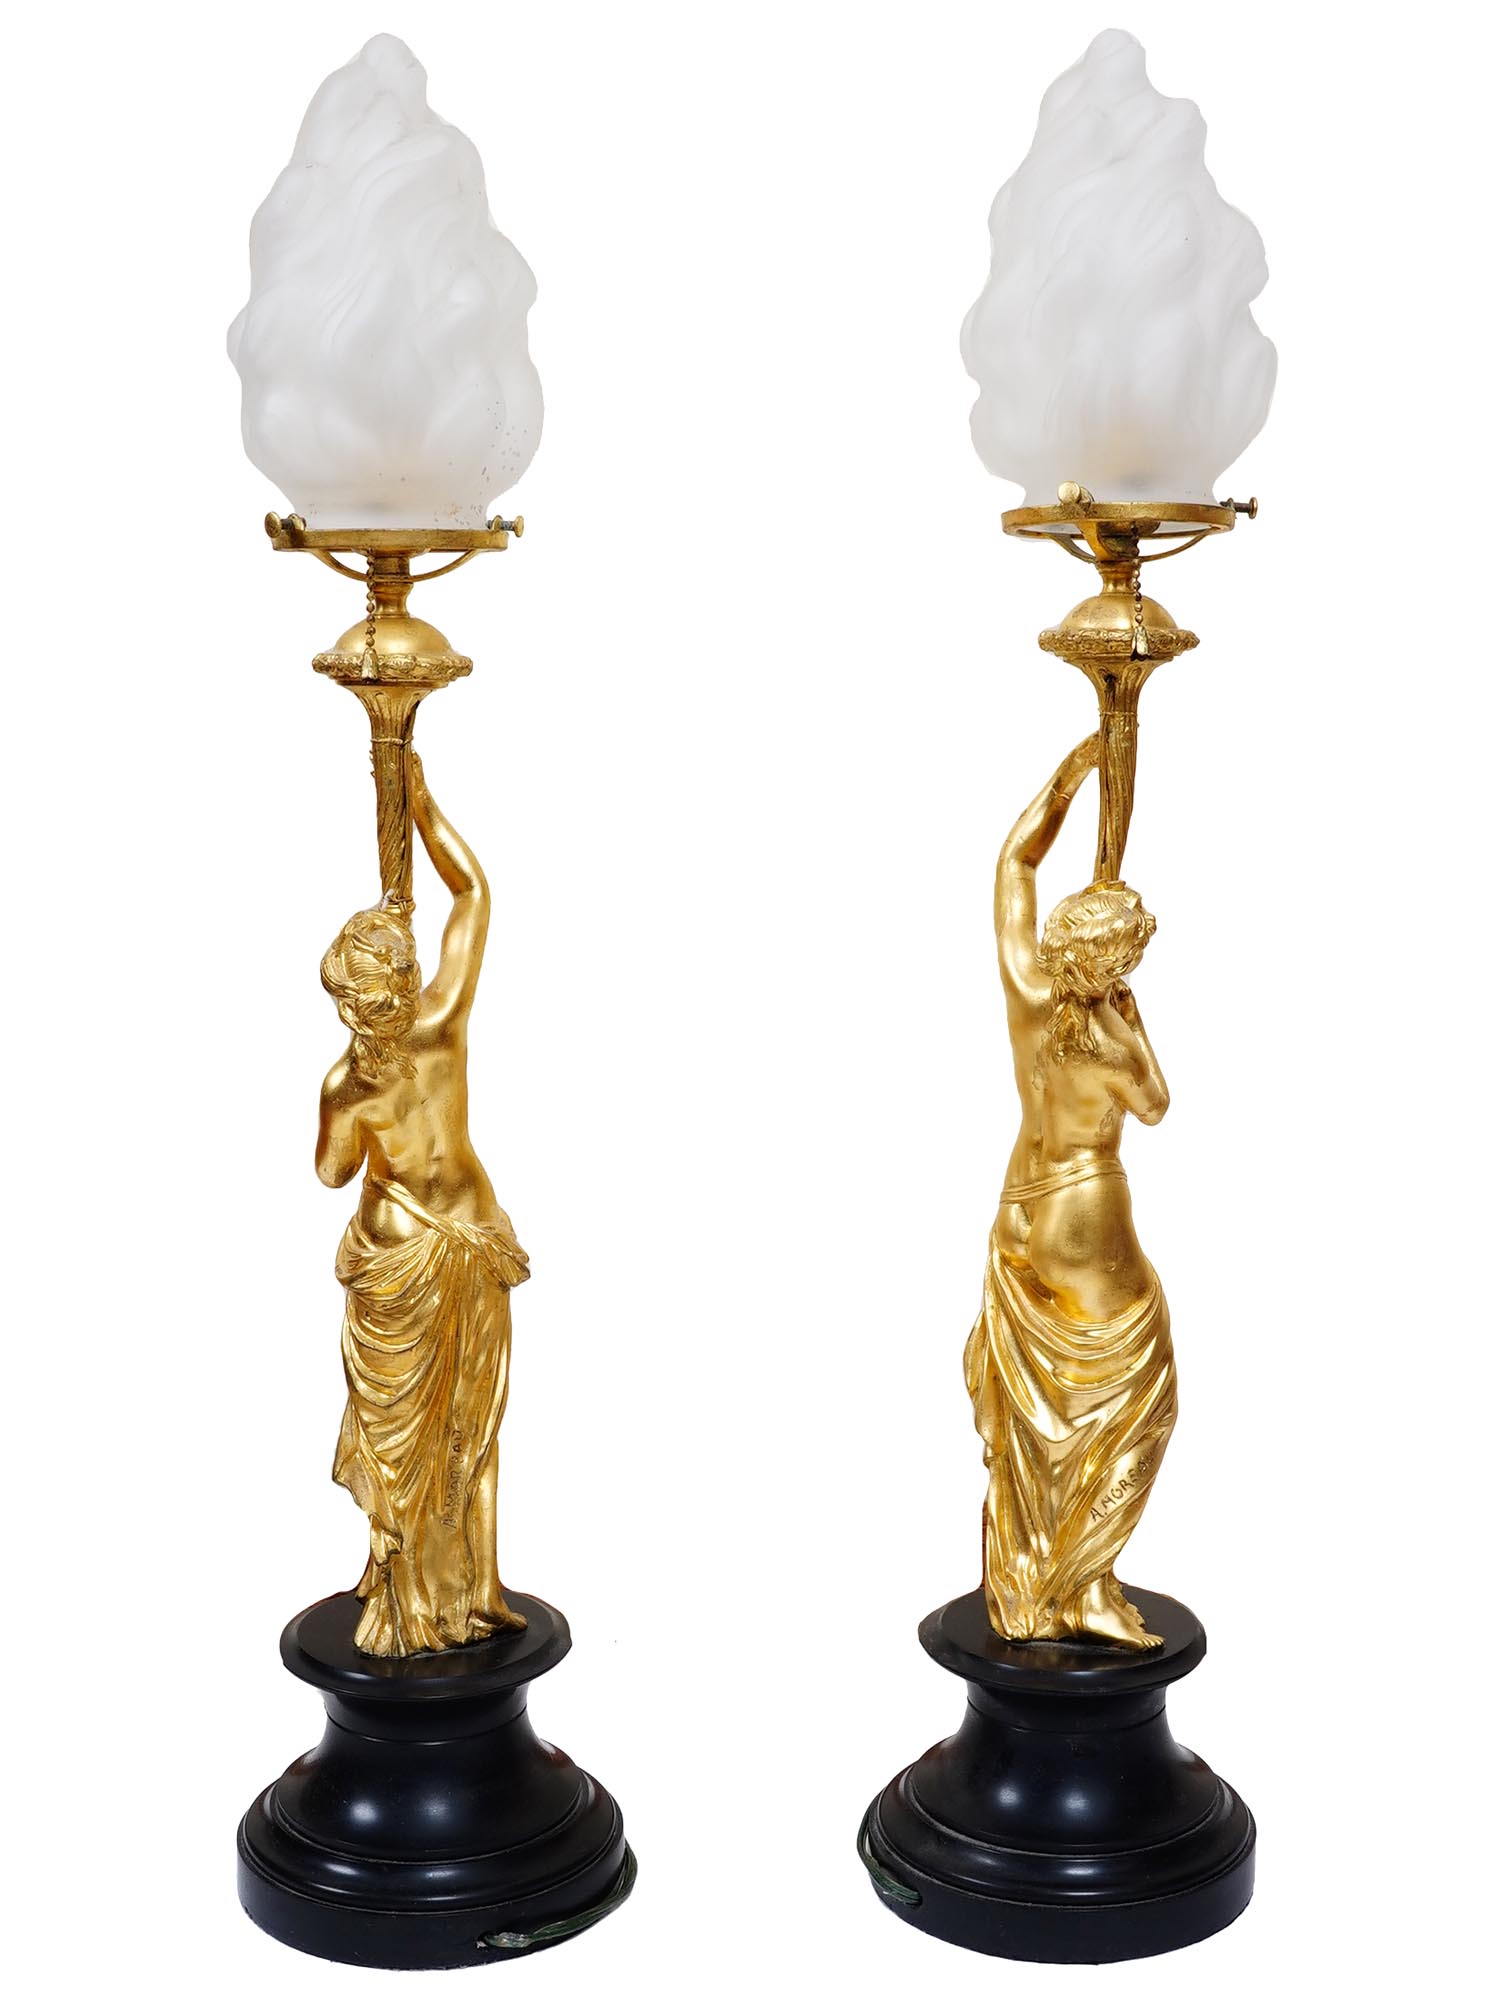 ANTIQUE FRENCH GILT BRONZE LAMPS BY AUGUSTE MOREAU PIC-3